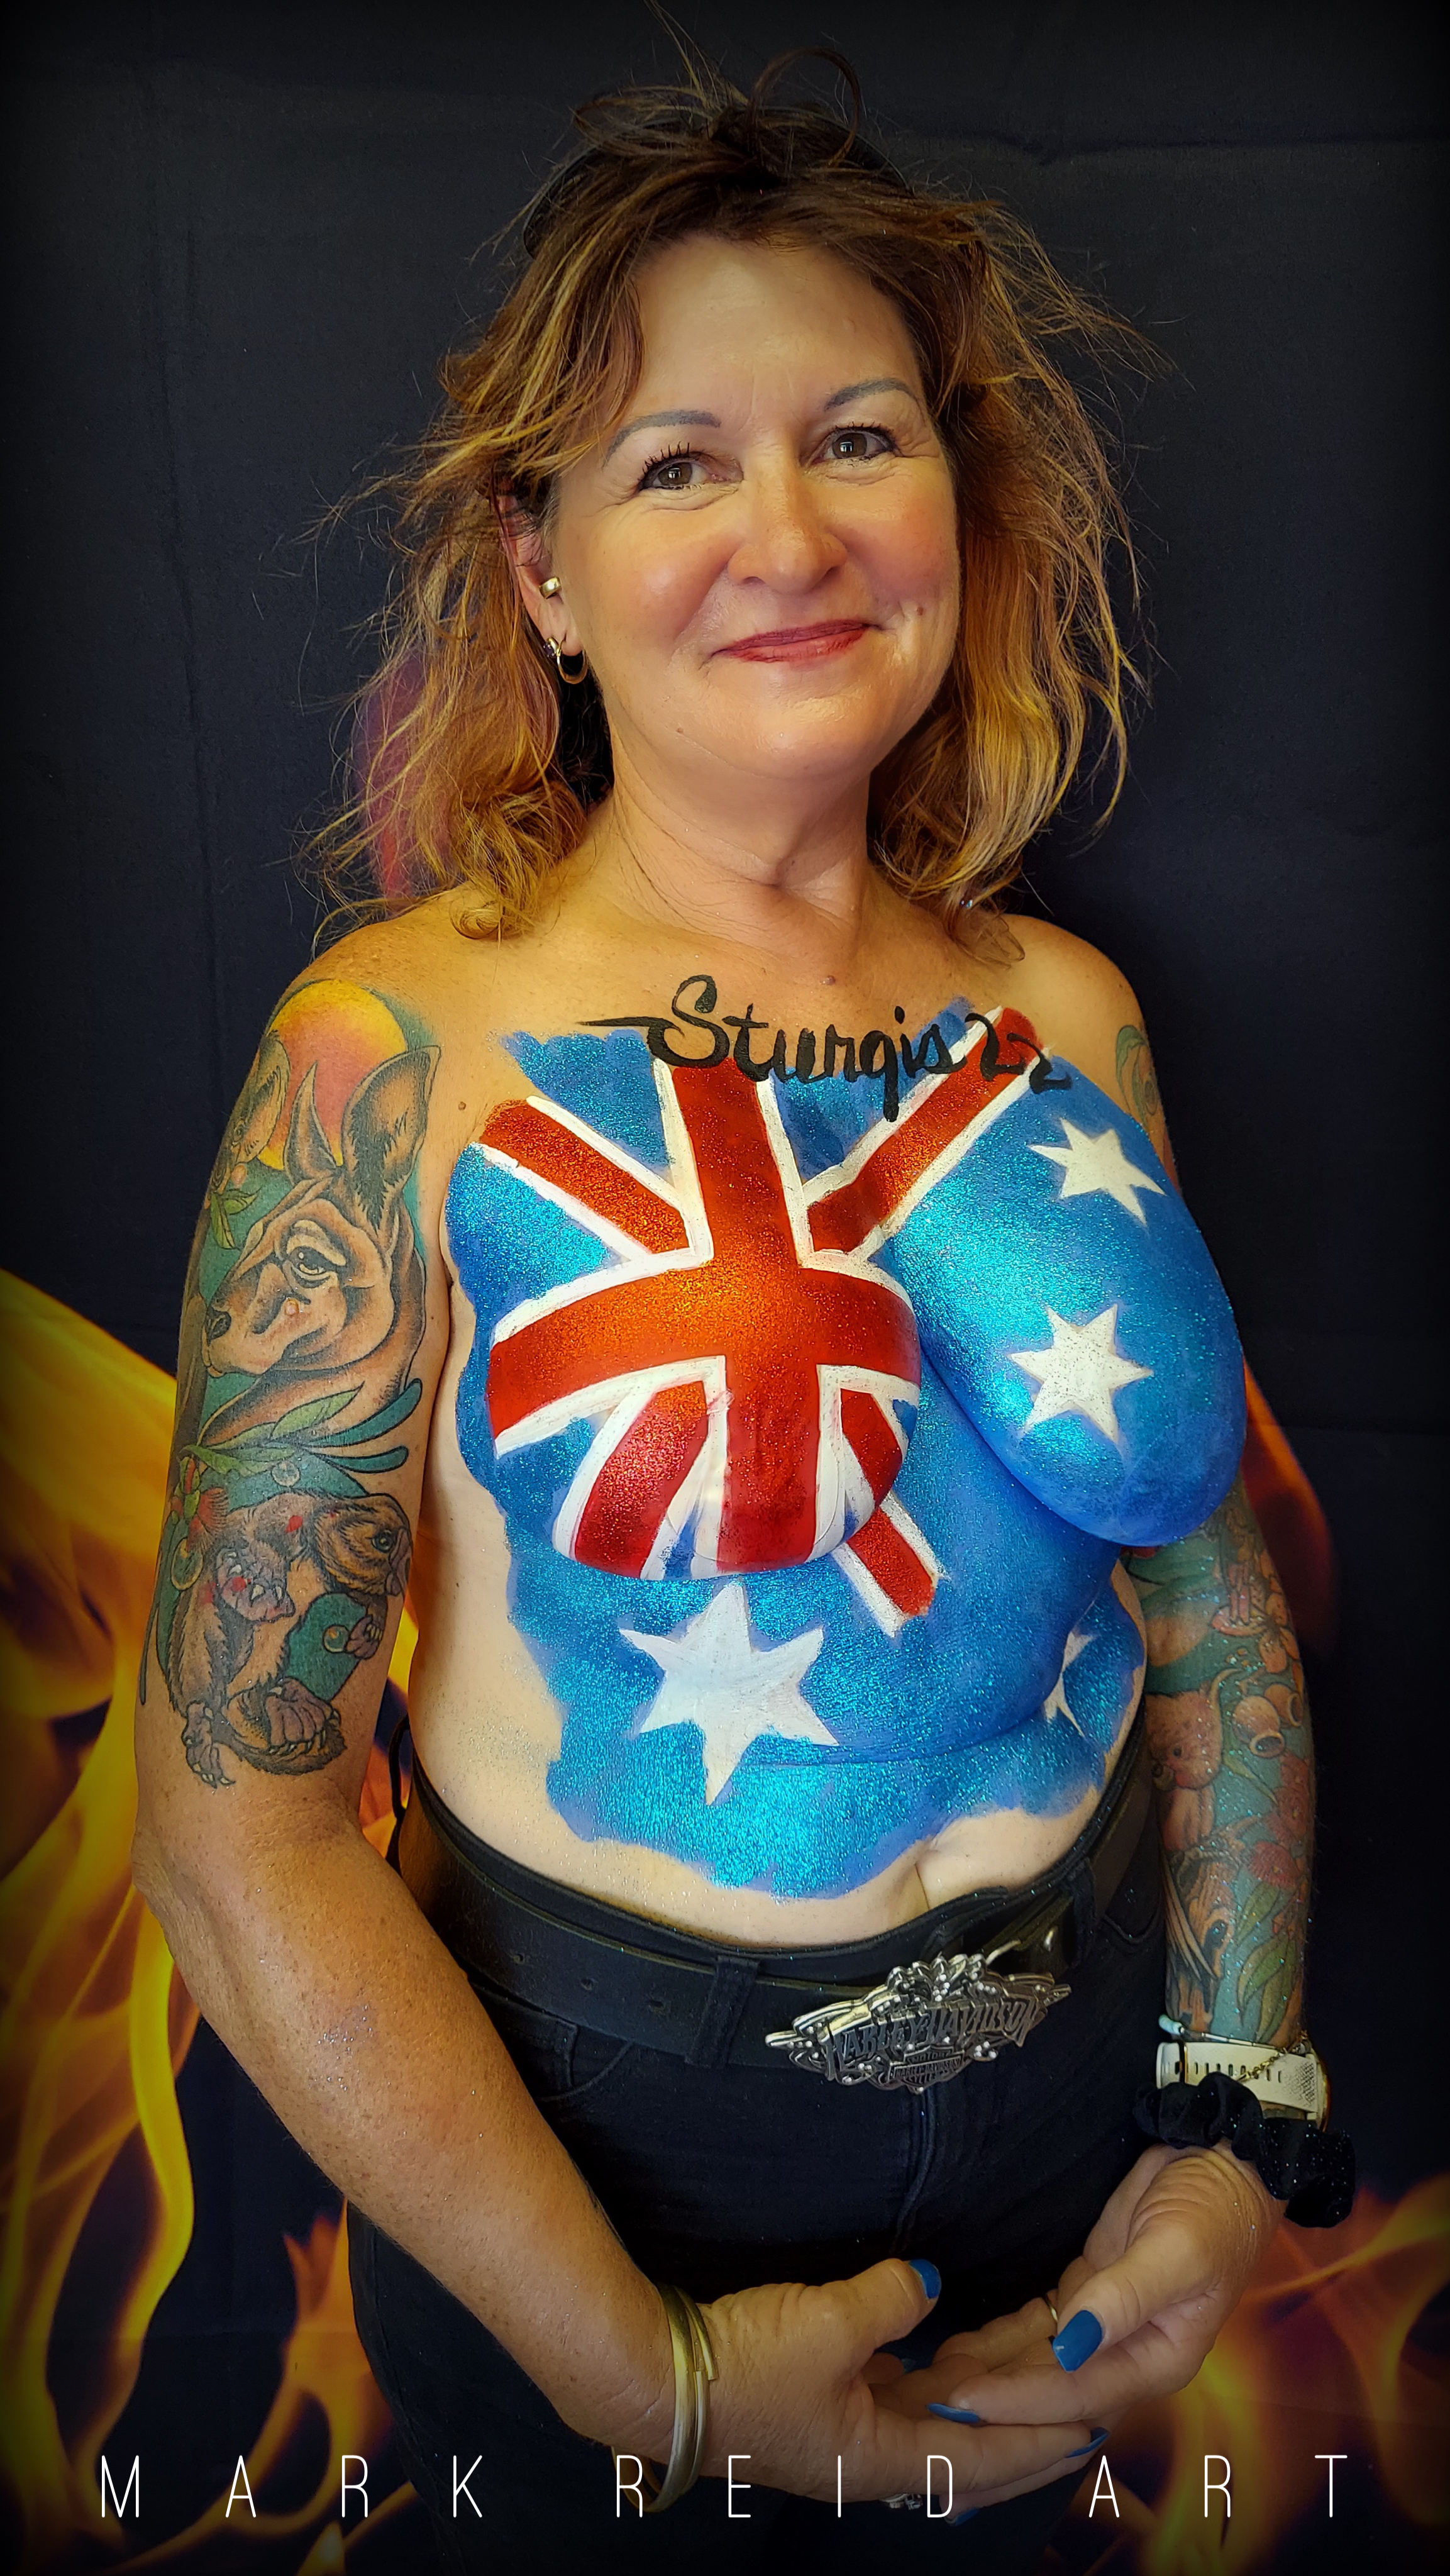 Redish-blonde haired woman with a painted on top that is the Australian flag across her chest with the word Sturgis at the top center near her collar bone